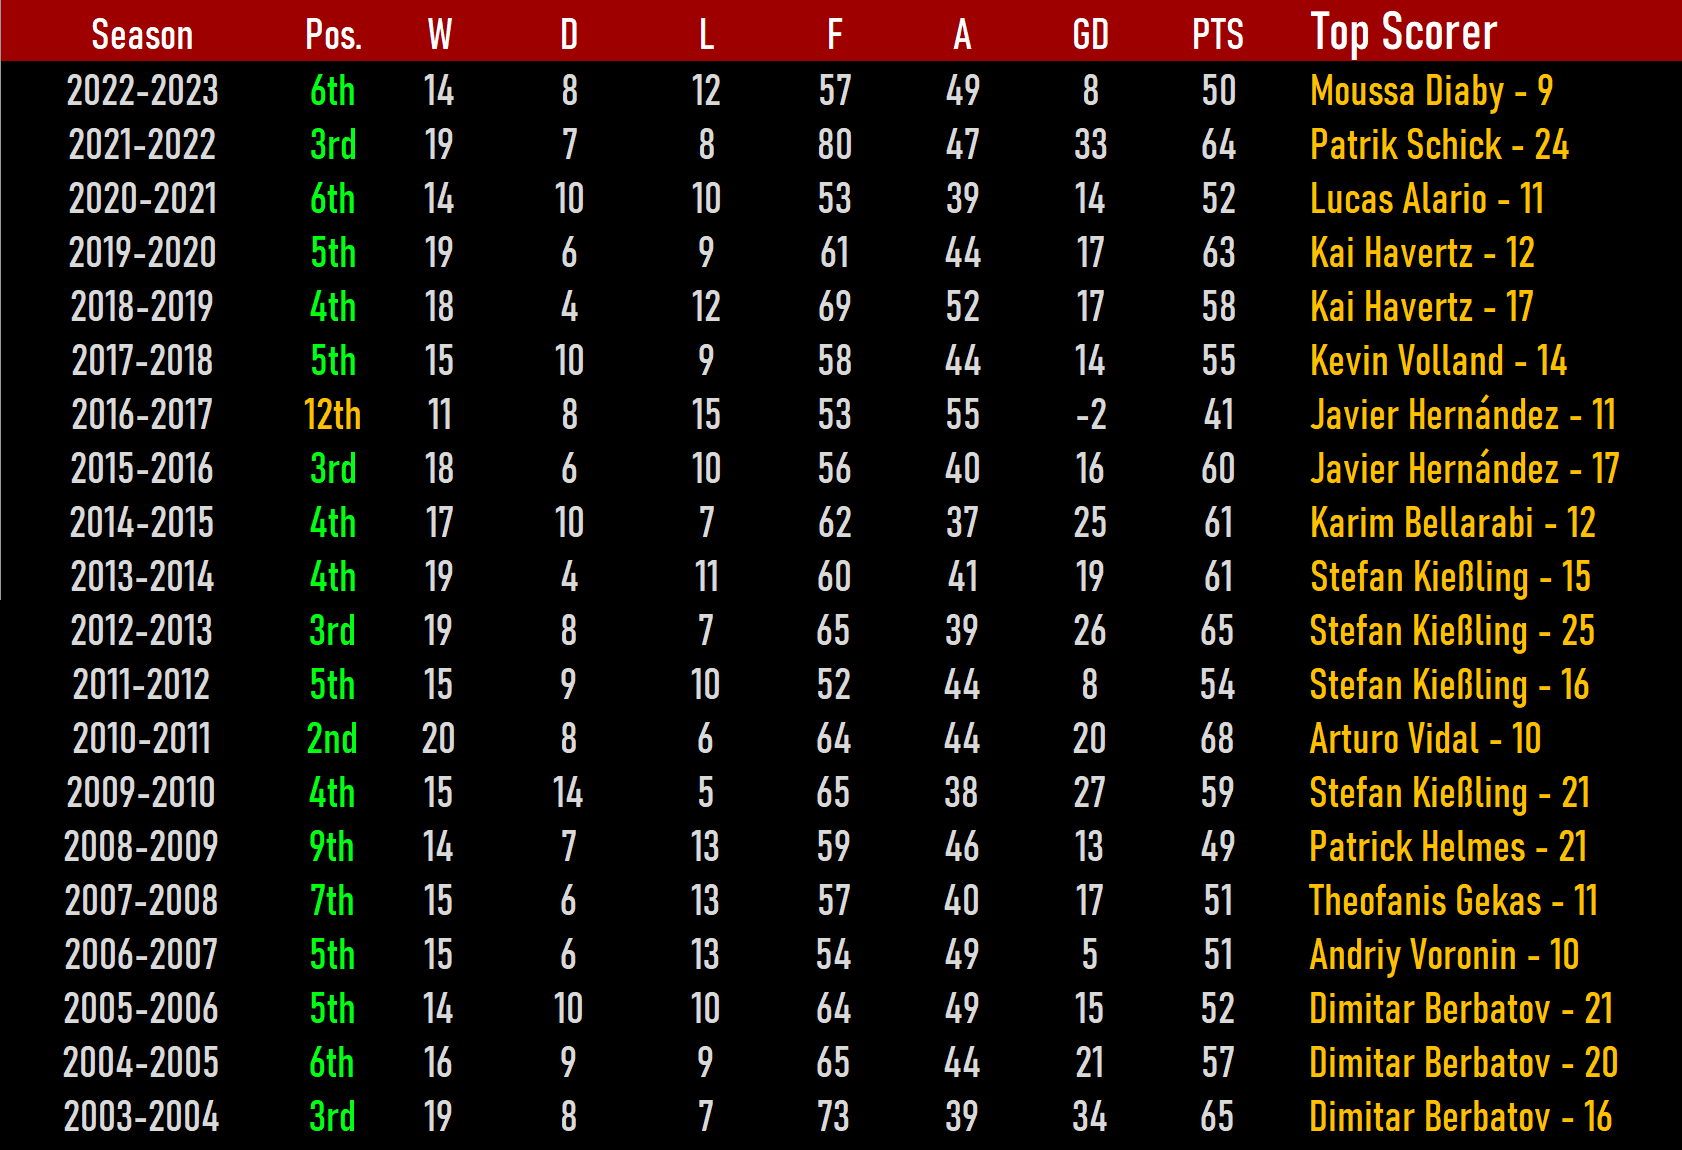 While current Bayer Leverkusen title odds show only an outside chance, they have a rich history of top-half finishes.